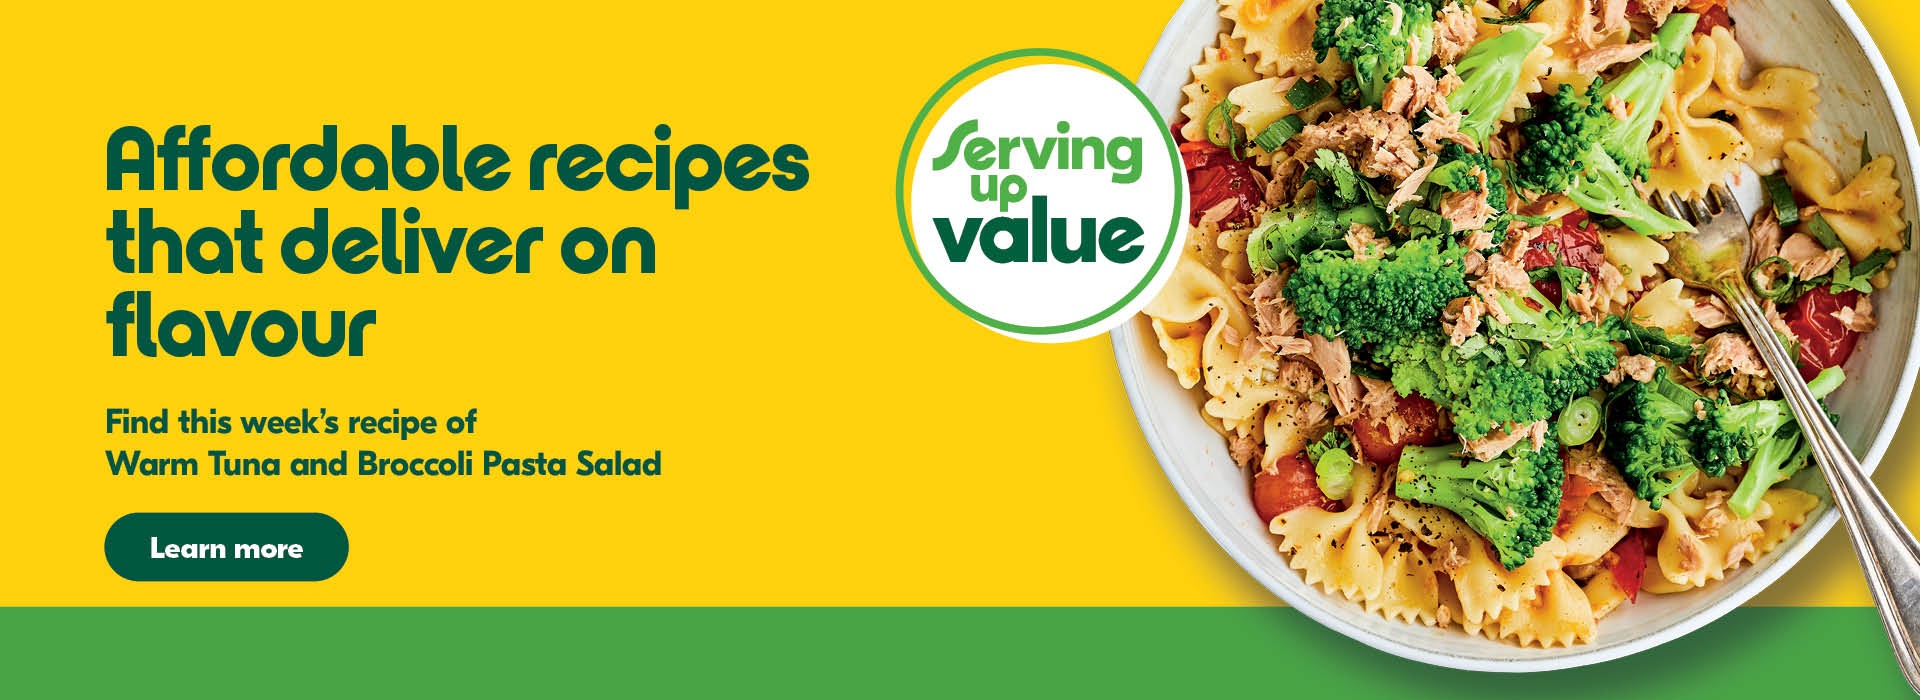 Affordable recipes that deliver on flavour; this weeks recipe is Warm Tuna and Broccoli Pasta Salad